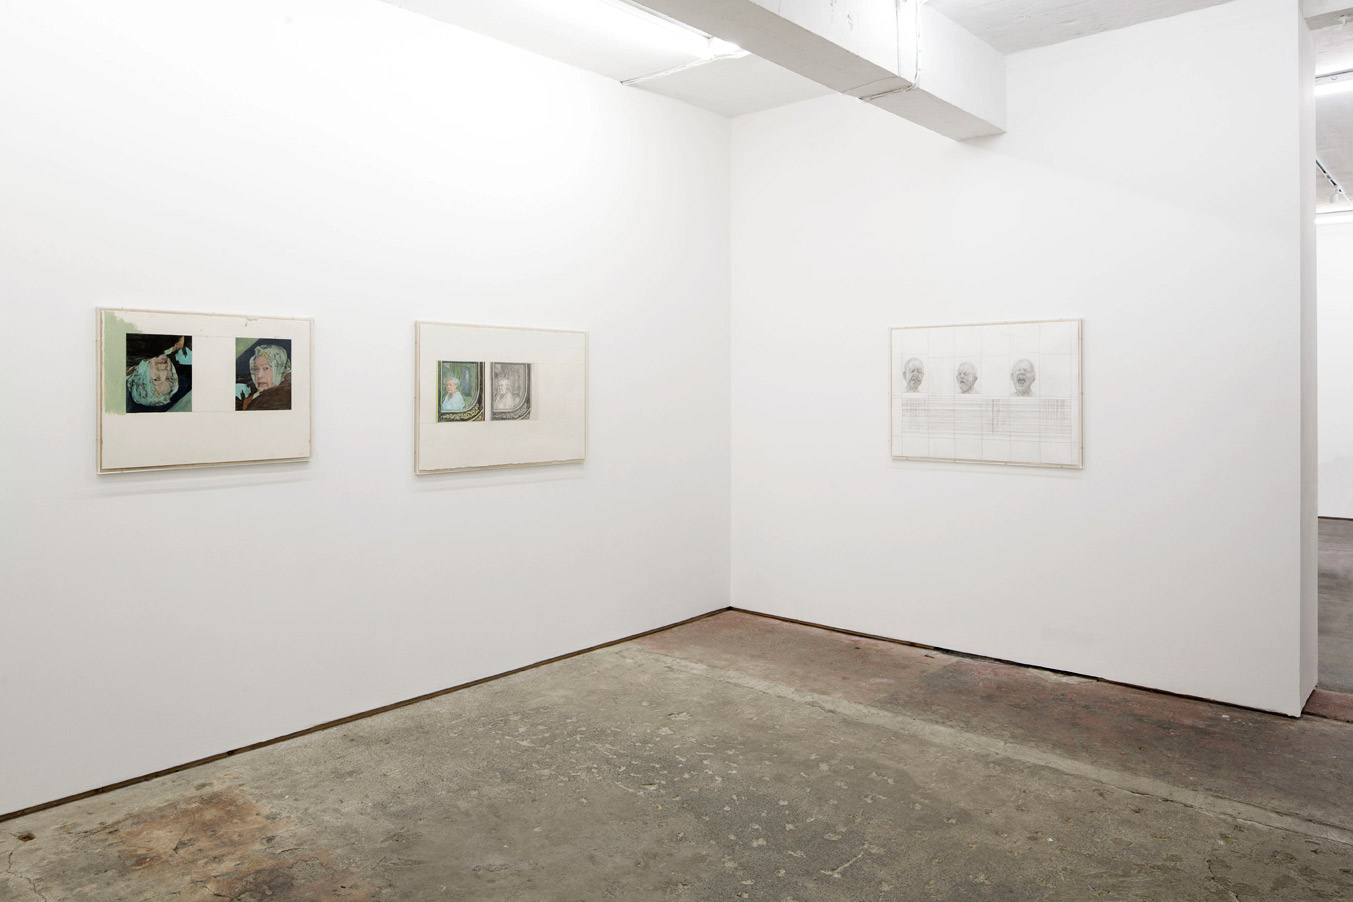 Stuart Brisley: Recent Paintings from the Museum of Ordure at Lungley gallery, London. Install